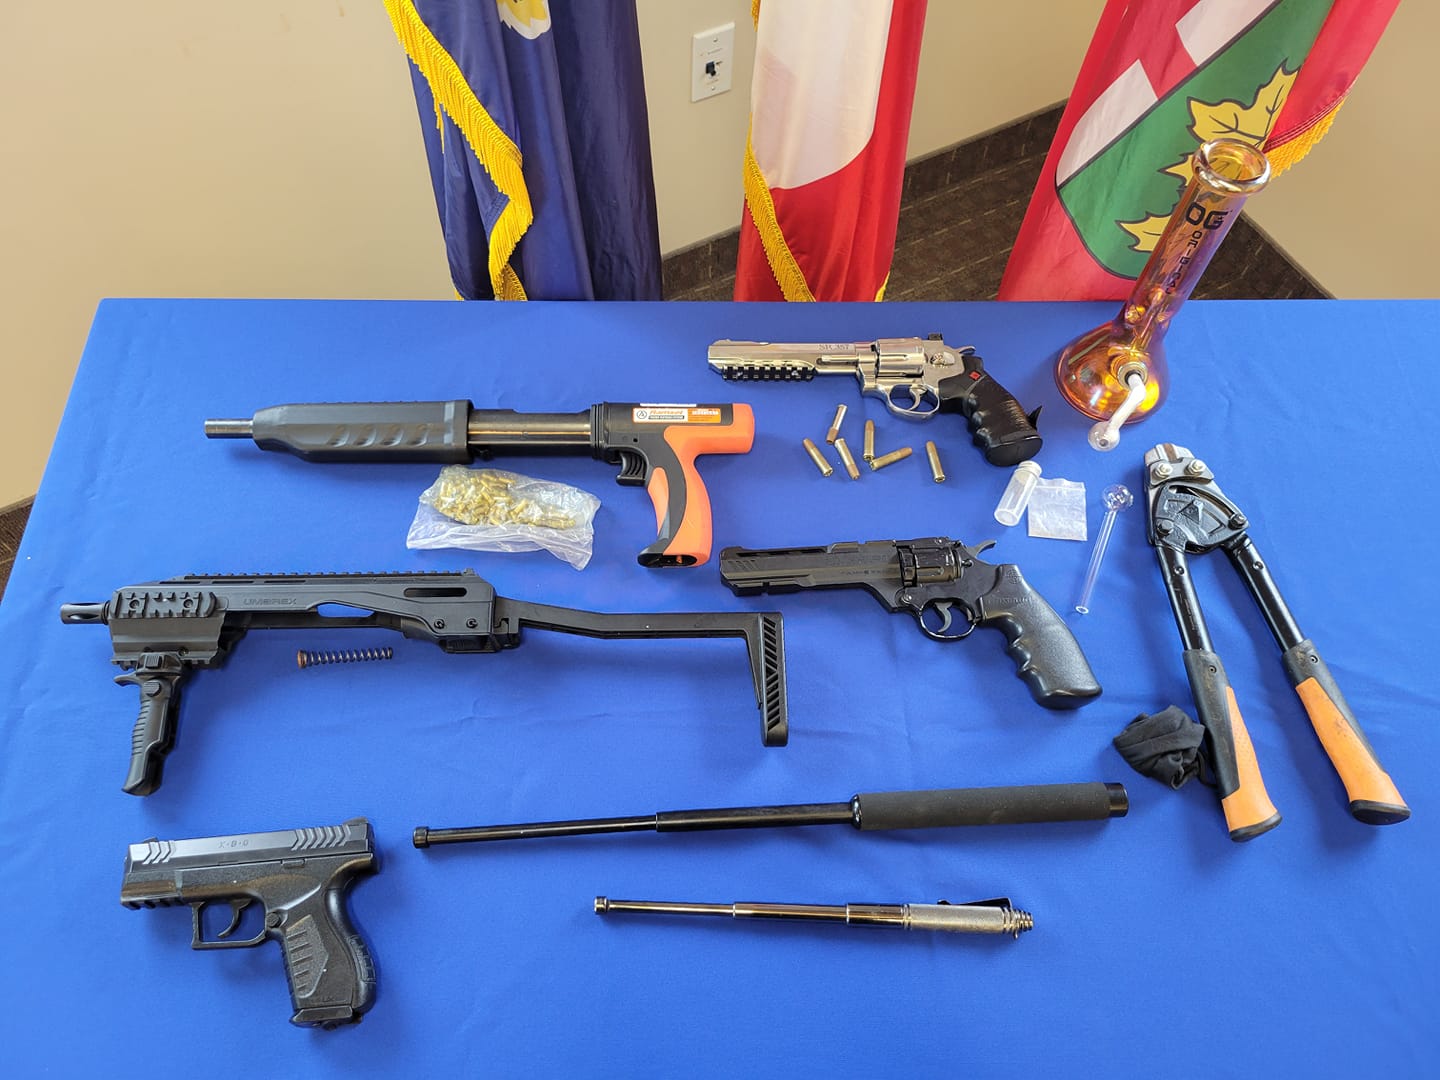 Suspected stolen vehicle leads to firearms charges